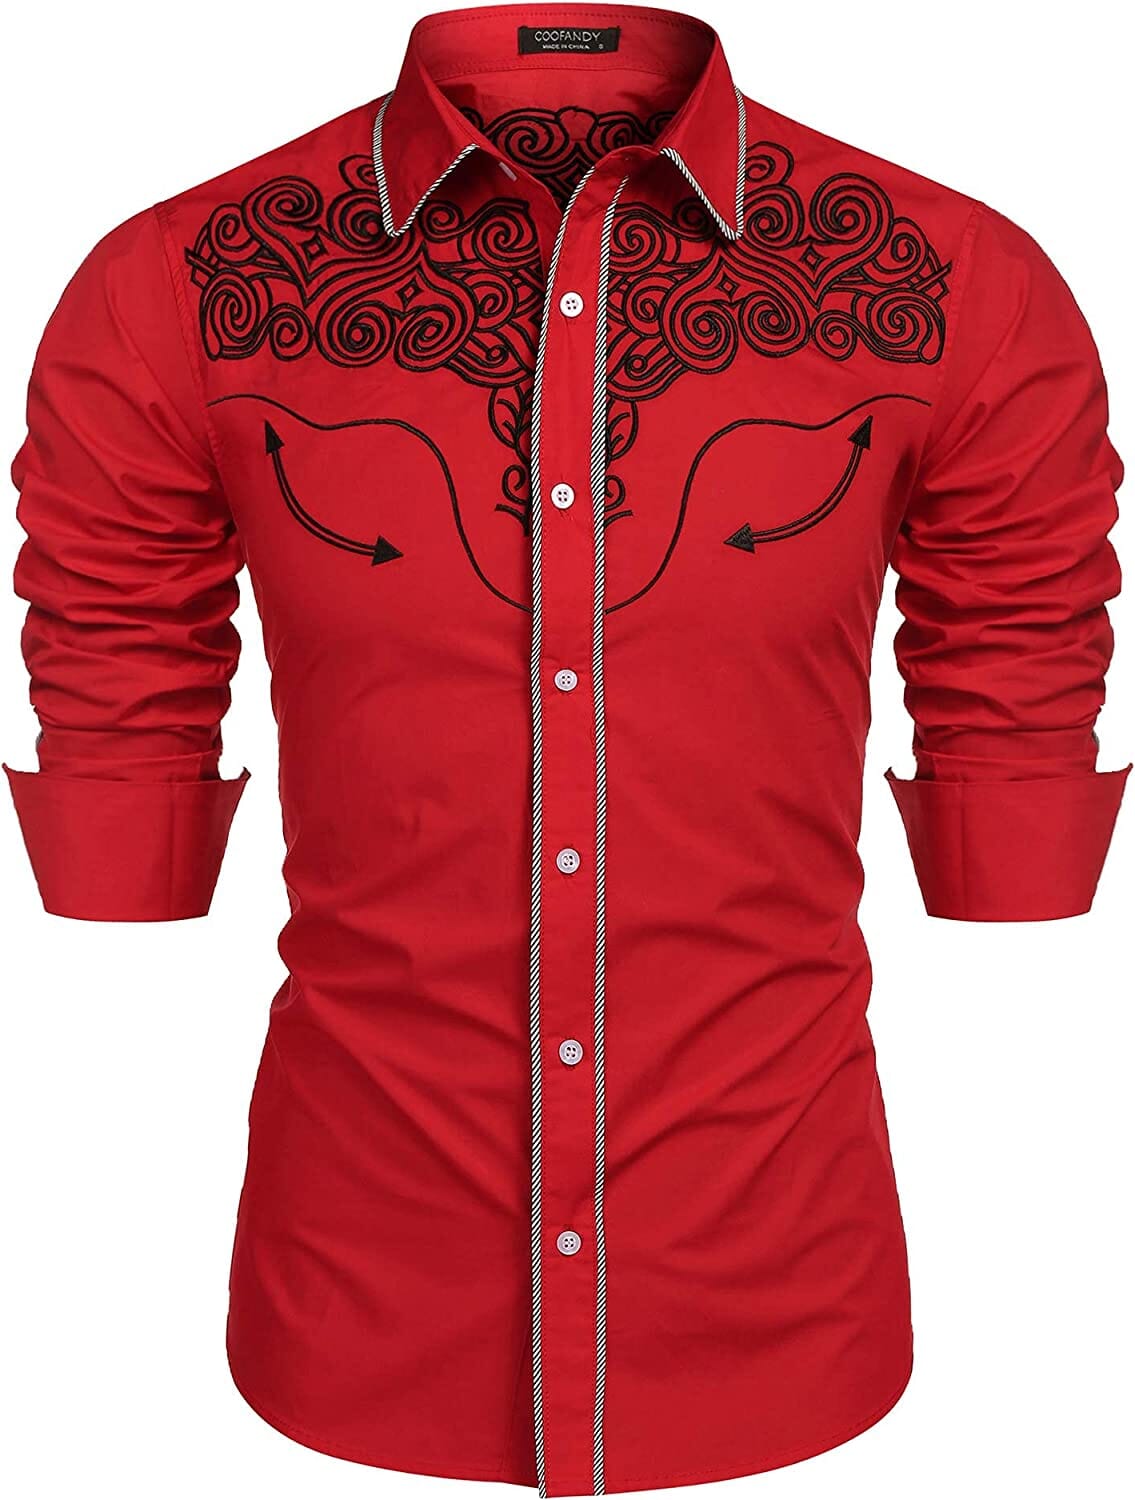 Embroidered Cowboy Button Down Shirt (US Only) Shirts COOFANDY Store Classic Wine Red S 